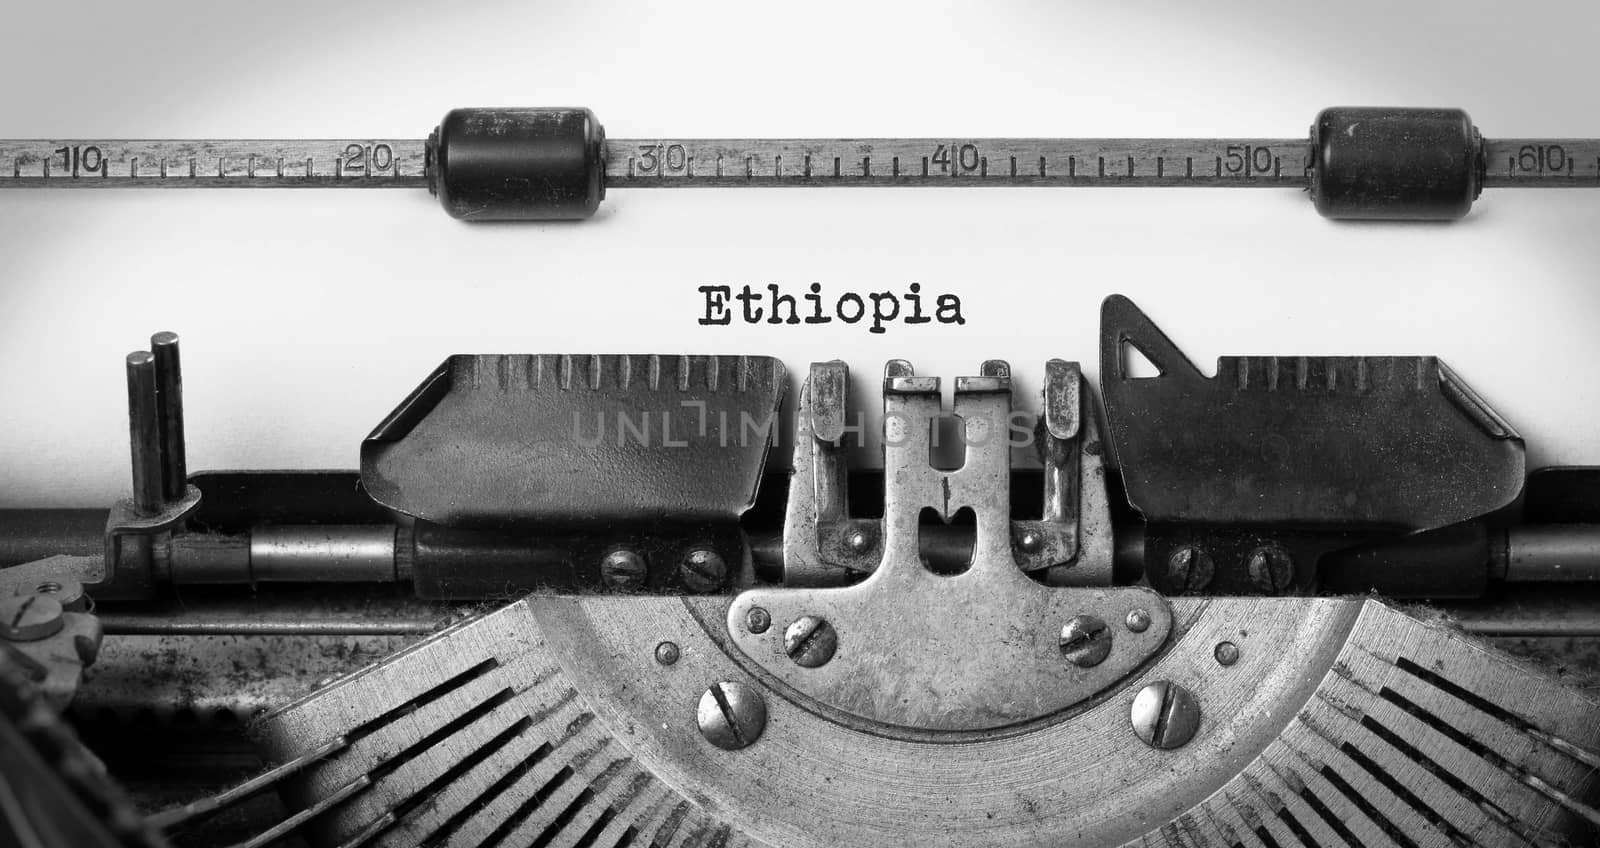 Inscription made by vinrage typewriter, country, Ethiopia